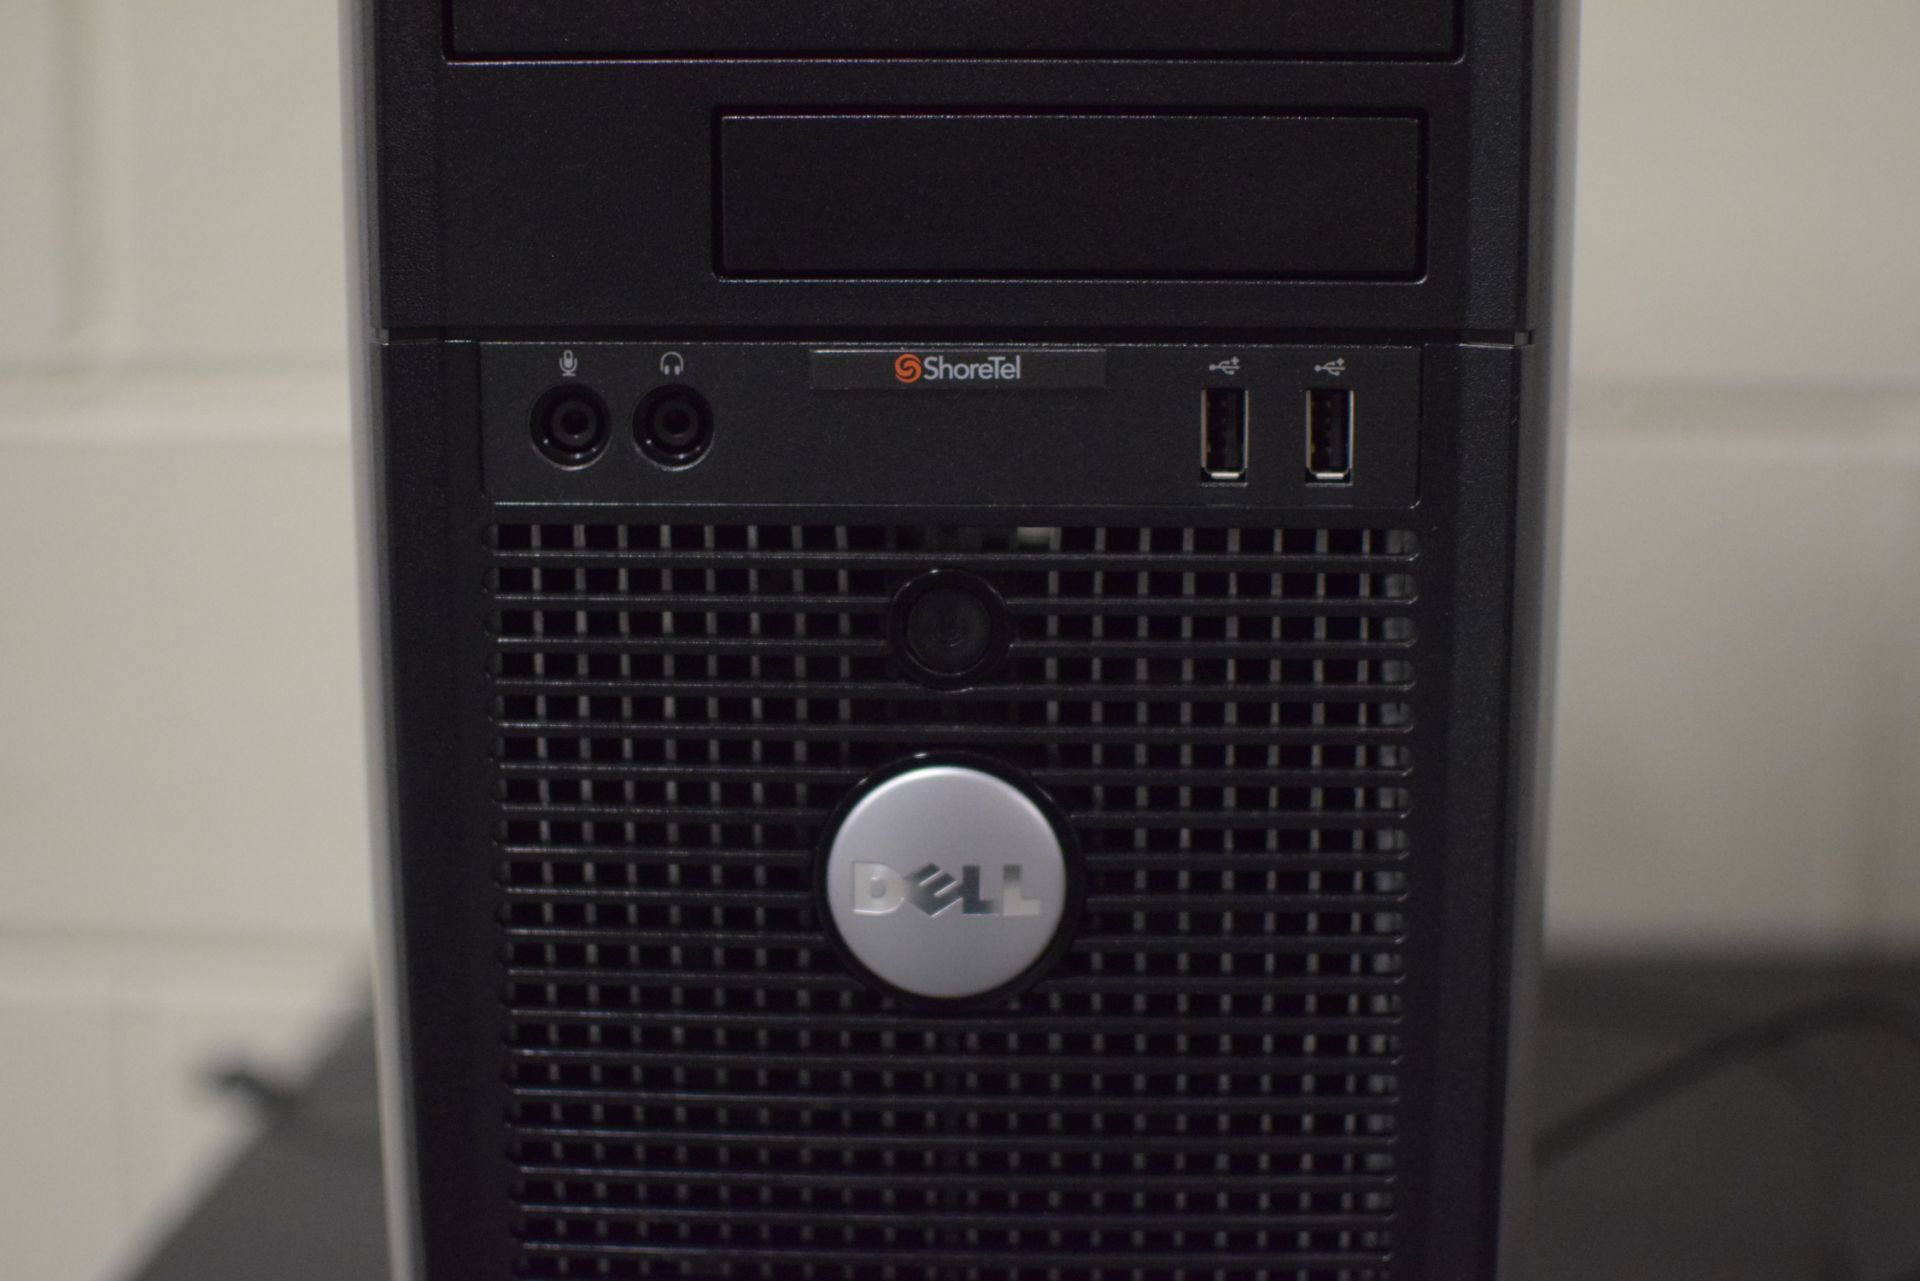 Dell Optiplex 380 Shoretel Tower With Shoretel And Snom Phone Systems - Image 6 of 8